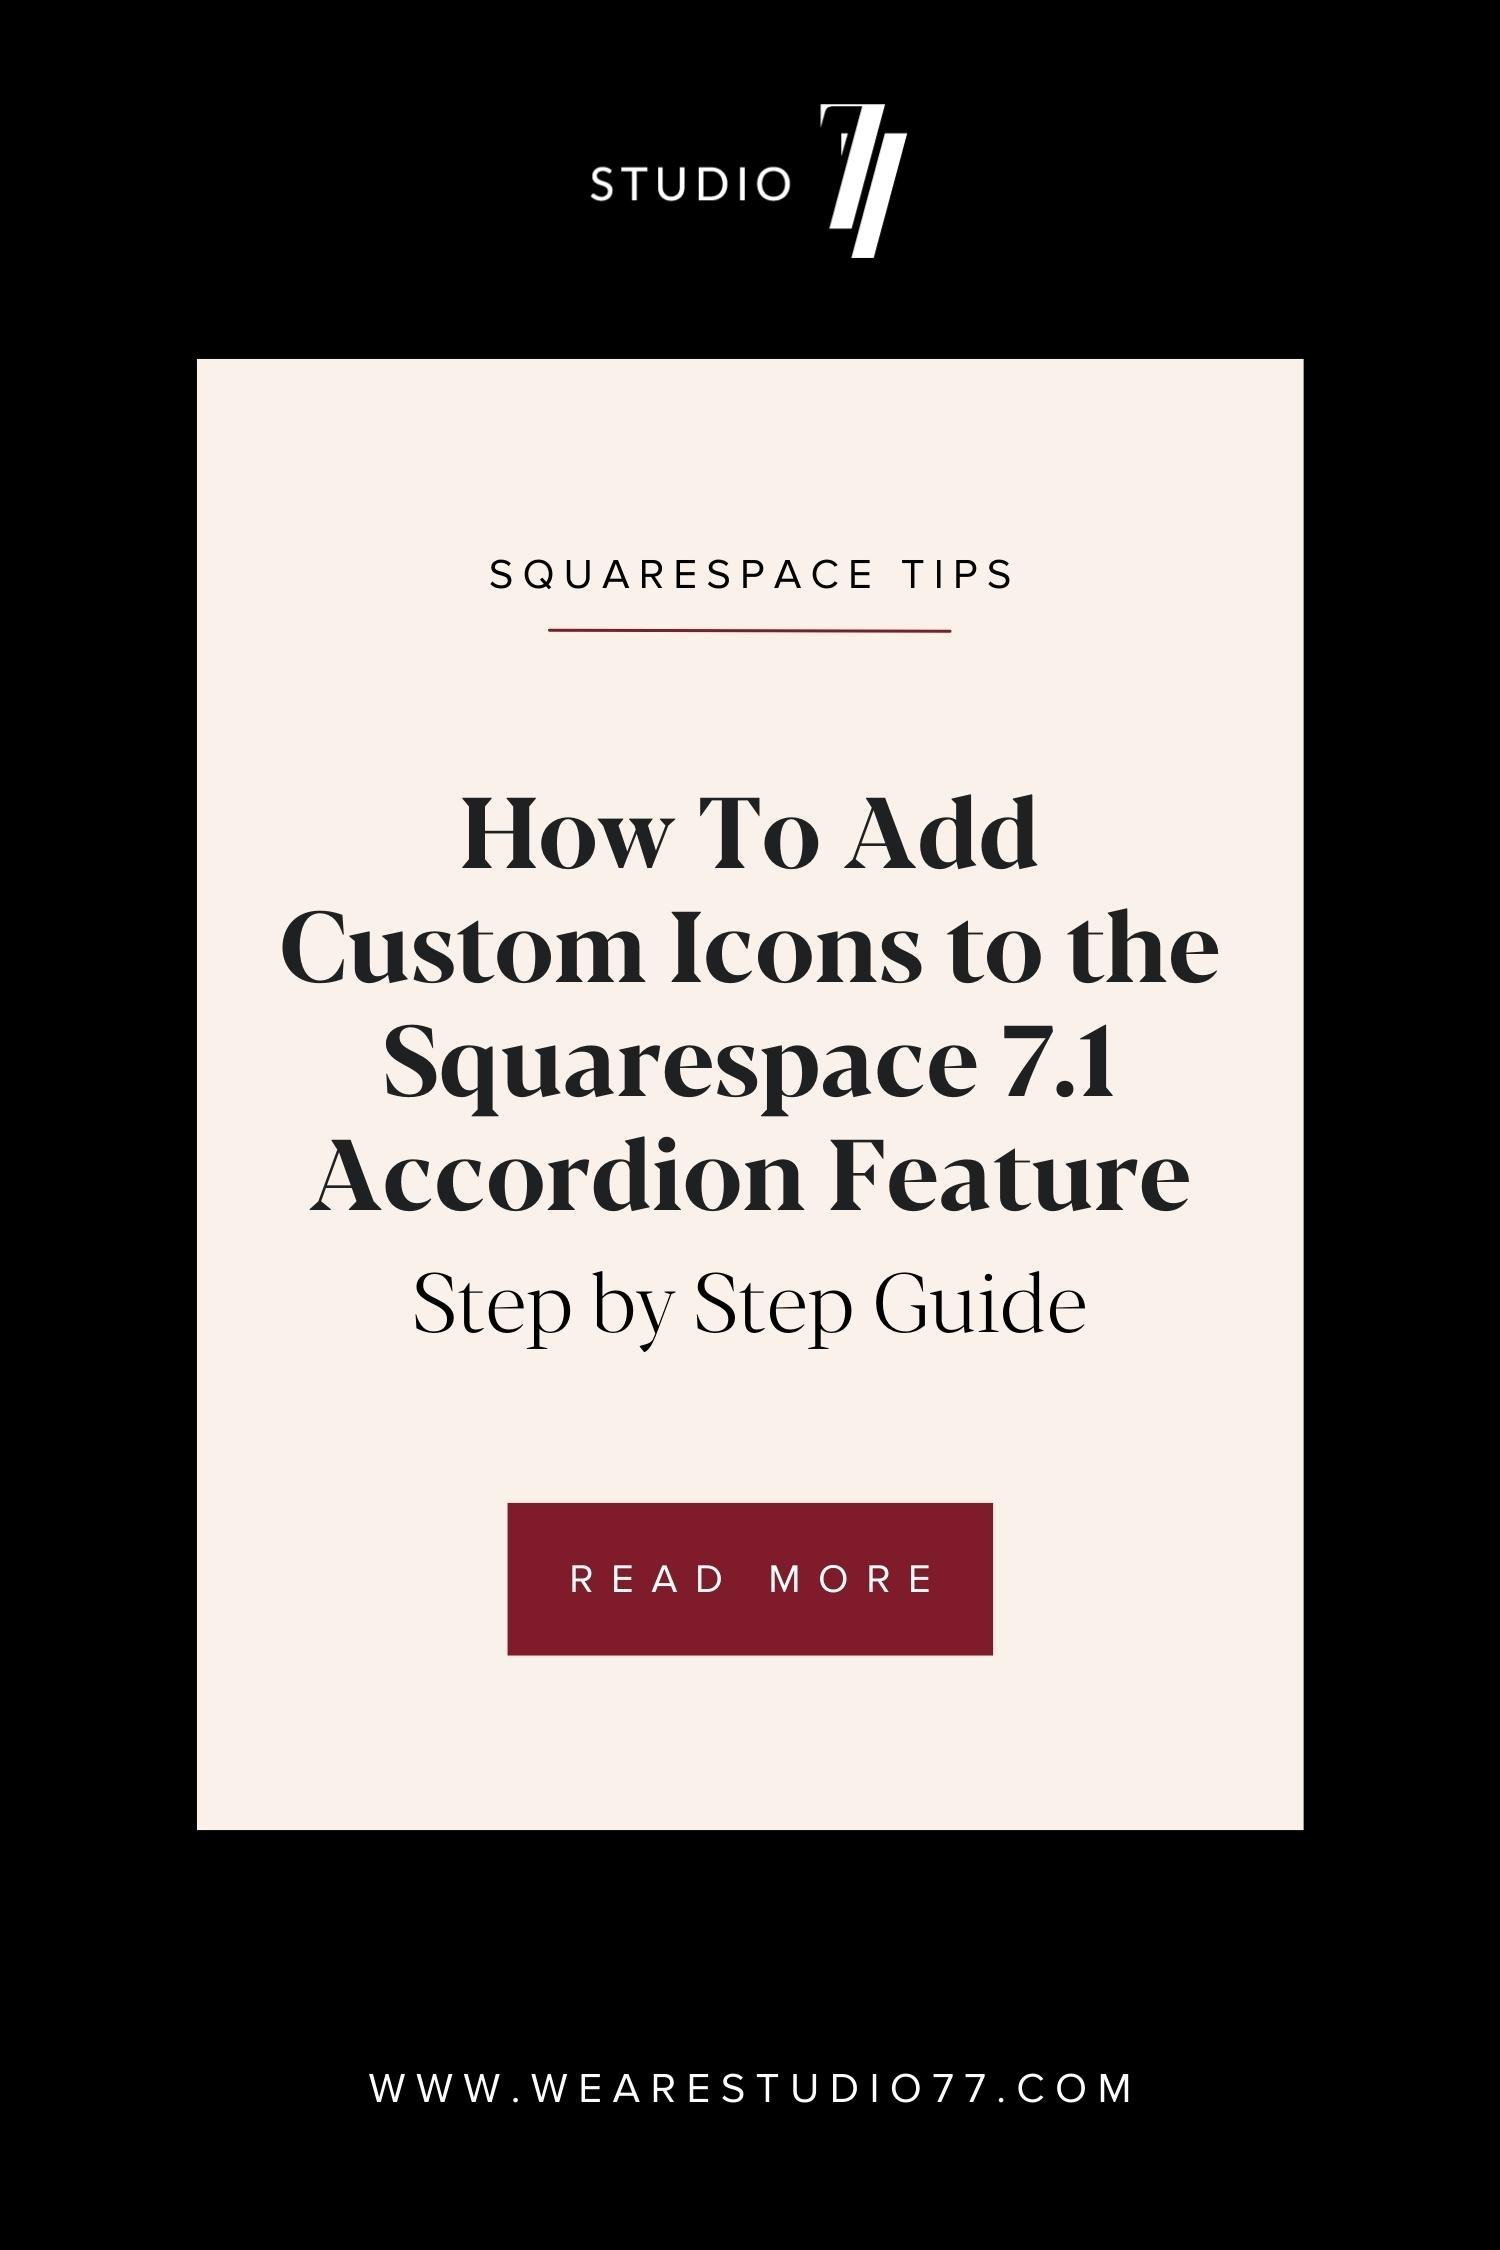 Squarespace Support UK | How To Add Custom Icons to Squarespace Accordion Feature (Copy)